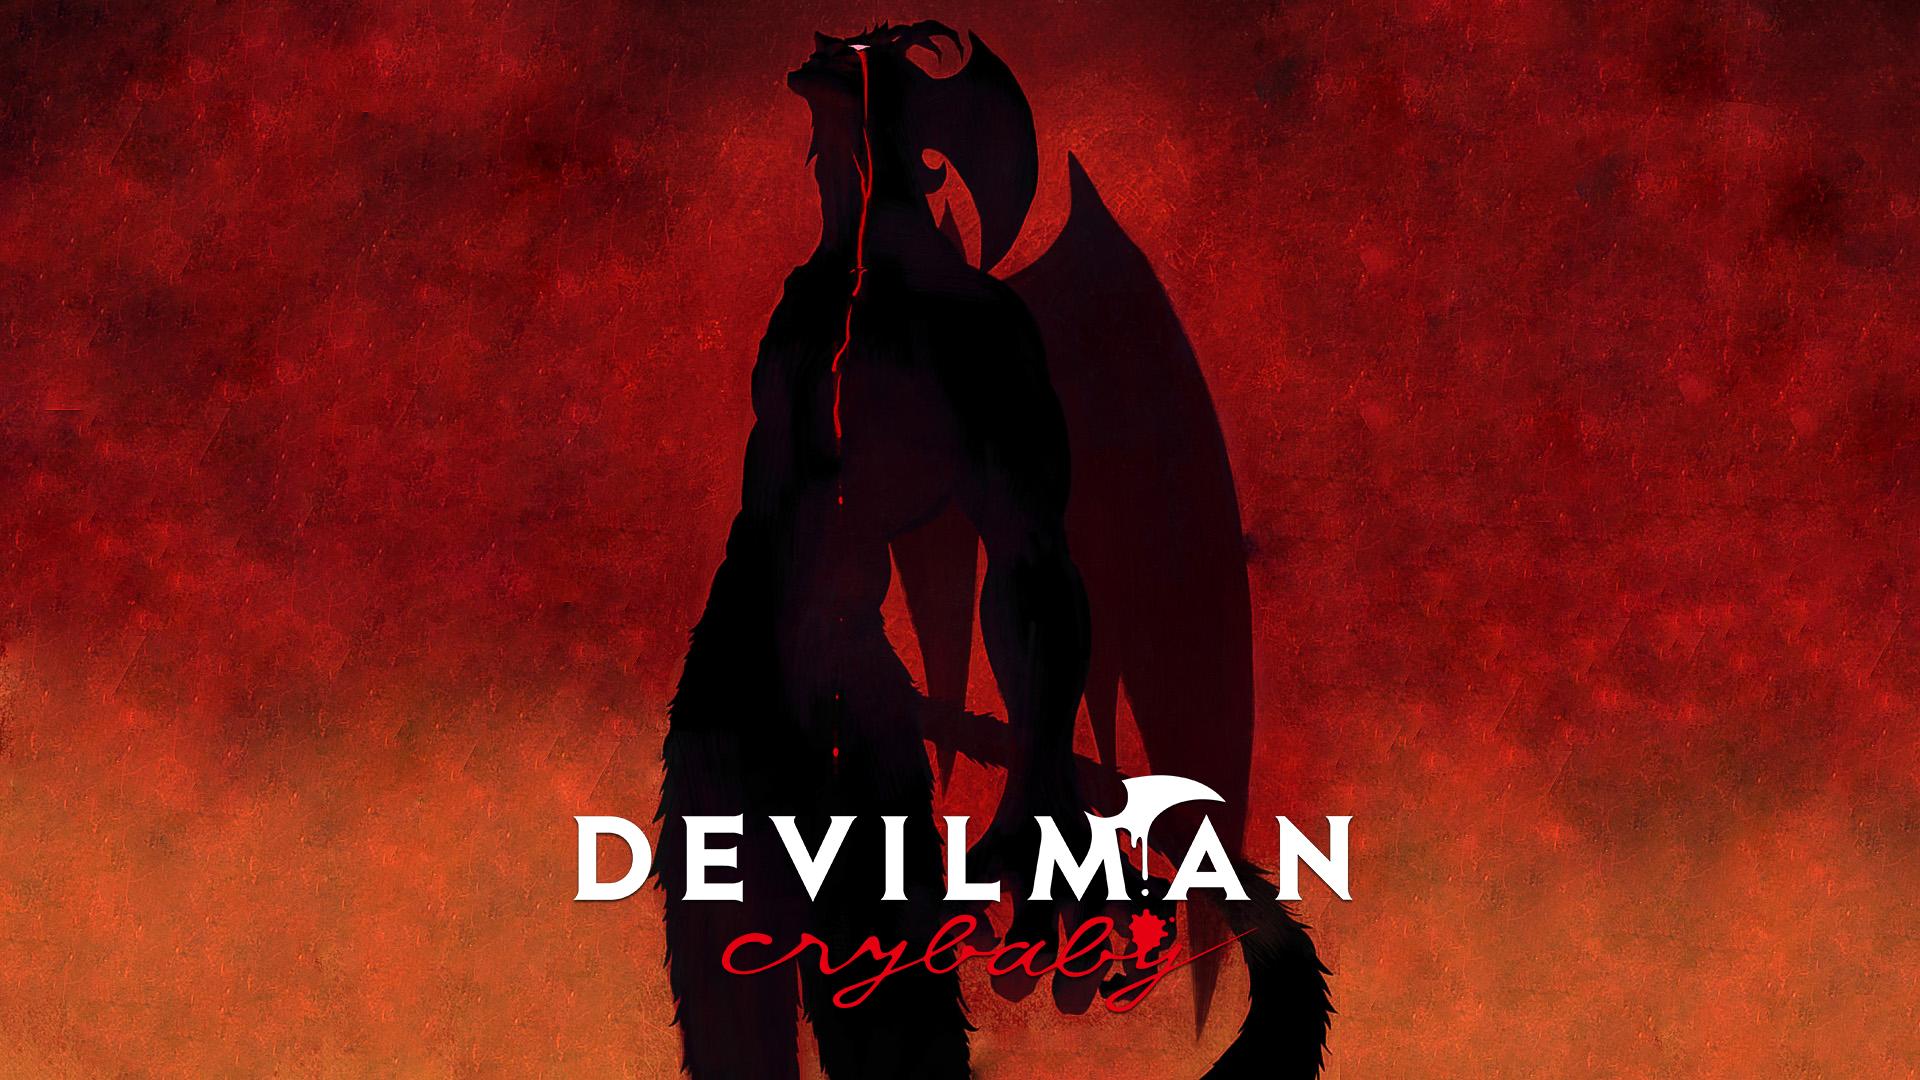 1920 x 1080 · png - Devilman Crybaby  |  | 1920x1080 | ID:915514 - Wallpaper Abyss